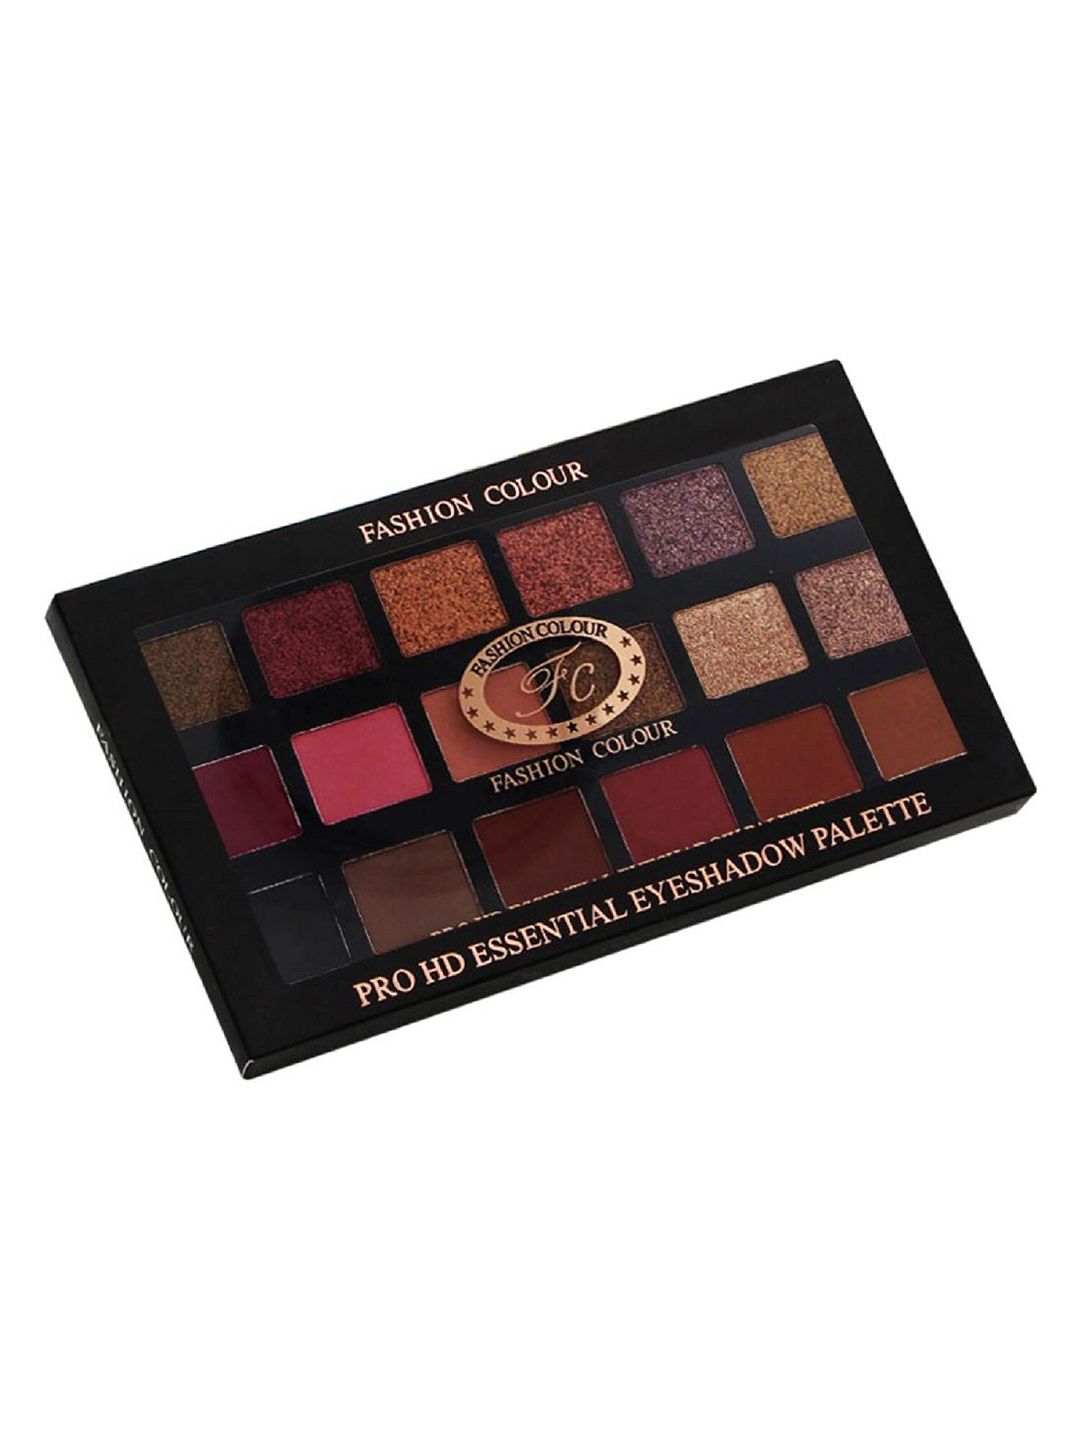 Fashion Colour Pro HD 18 Shades Essential Eyeshadow Palette - Shade 01 Price in India